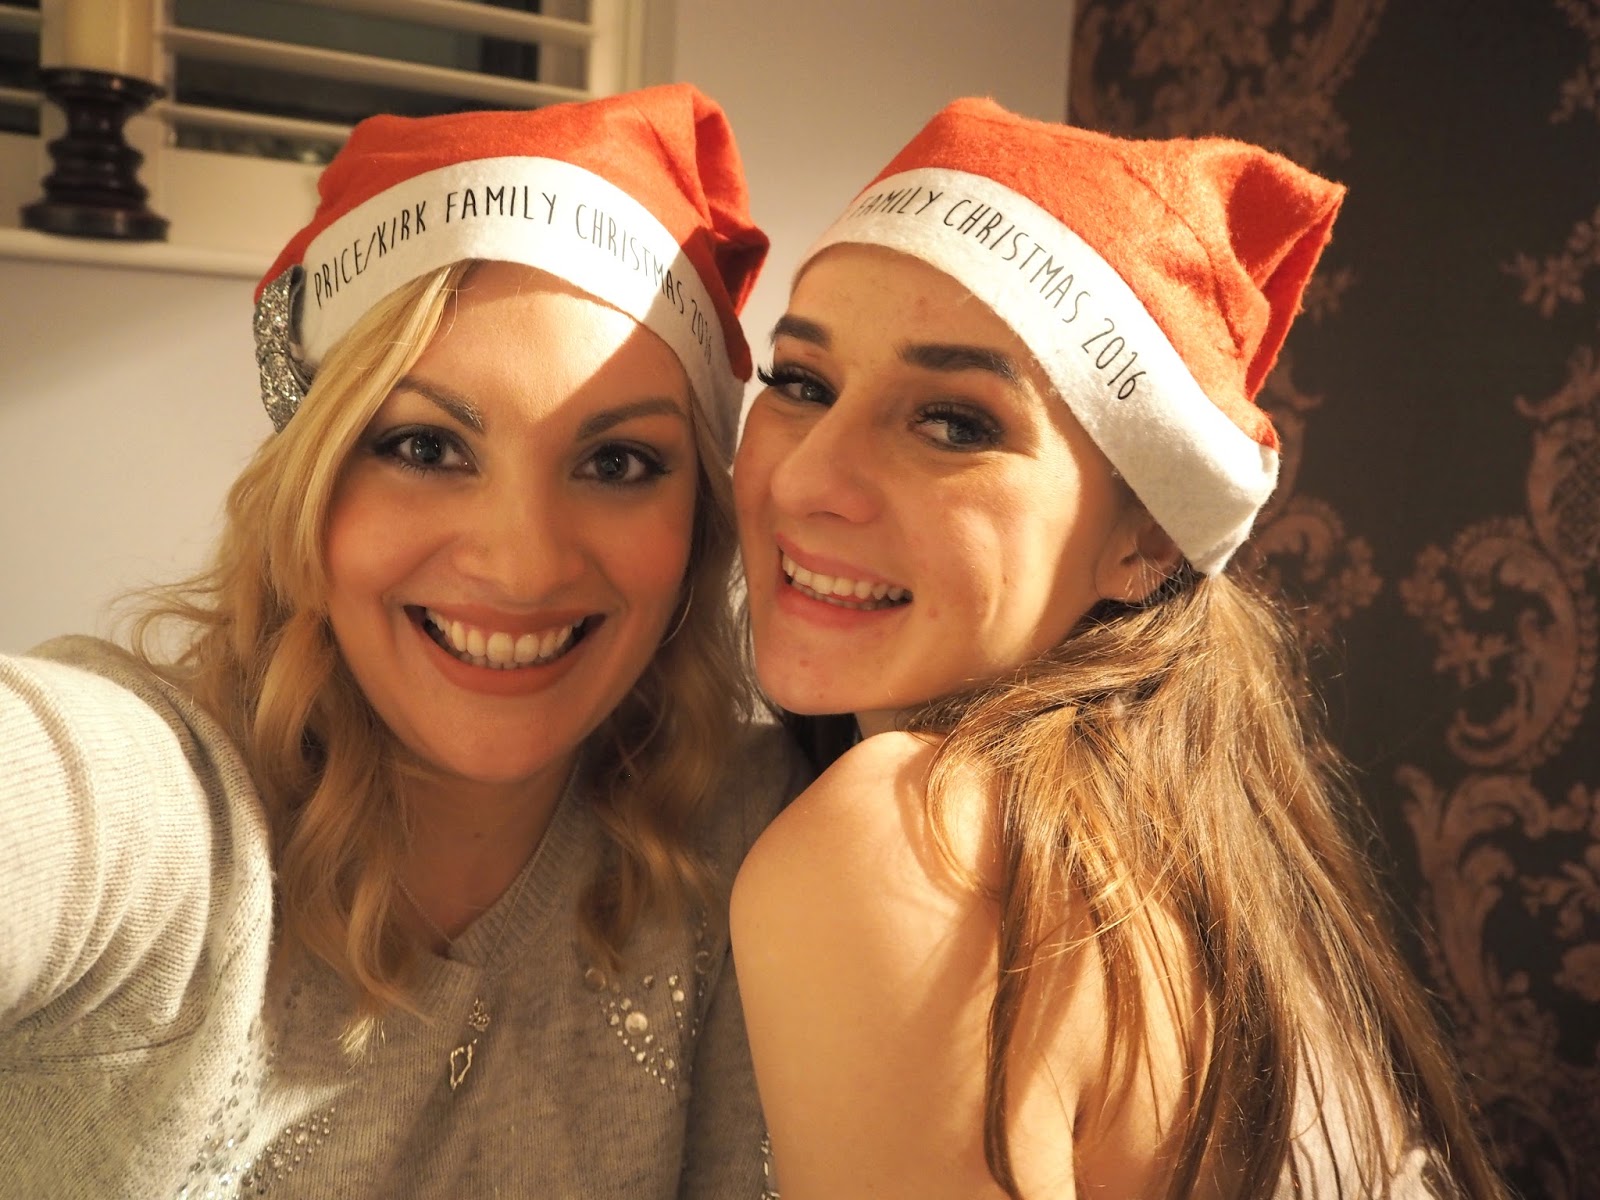 My Christmas in Pictures 2016, Katie Kirk Loves, Christmas Day, Big Family Christmas, Christmas Ideas, Christmas Inspiration, UK Blogger, Beauty Blogger, Fashion Blogger, Lifestyle Blogger